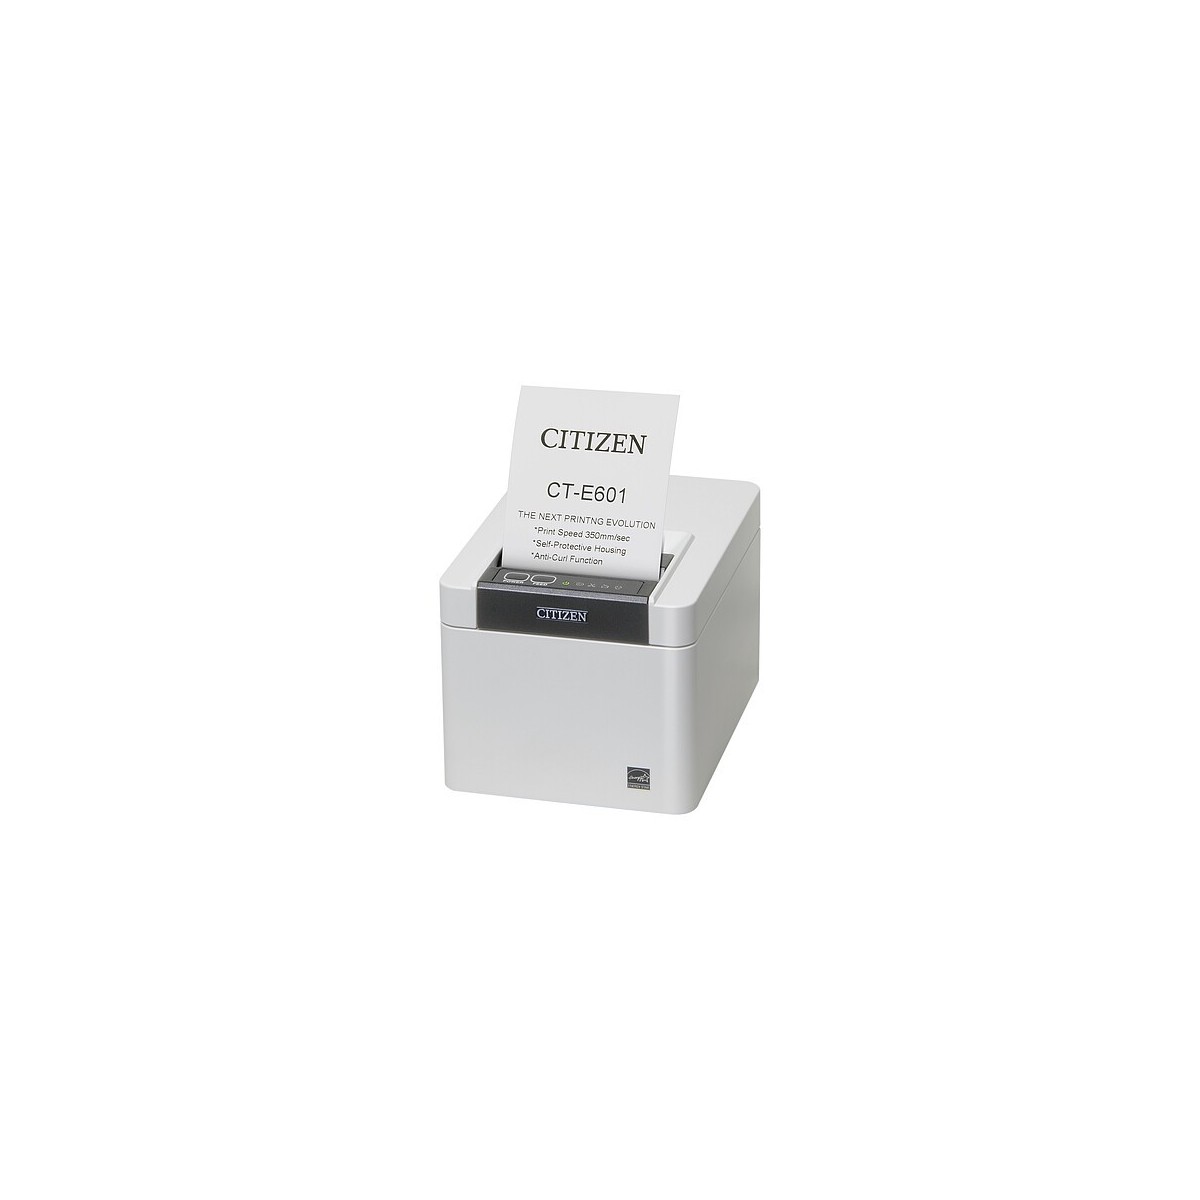 Citizen CT-E601 Printer USB with Optional Interface Card Slot